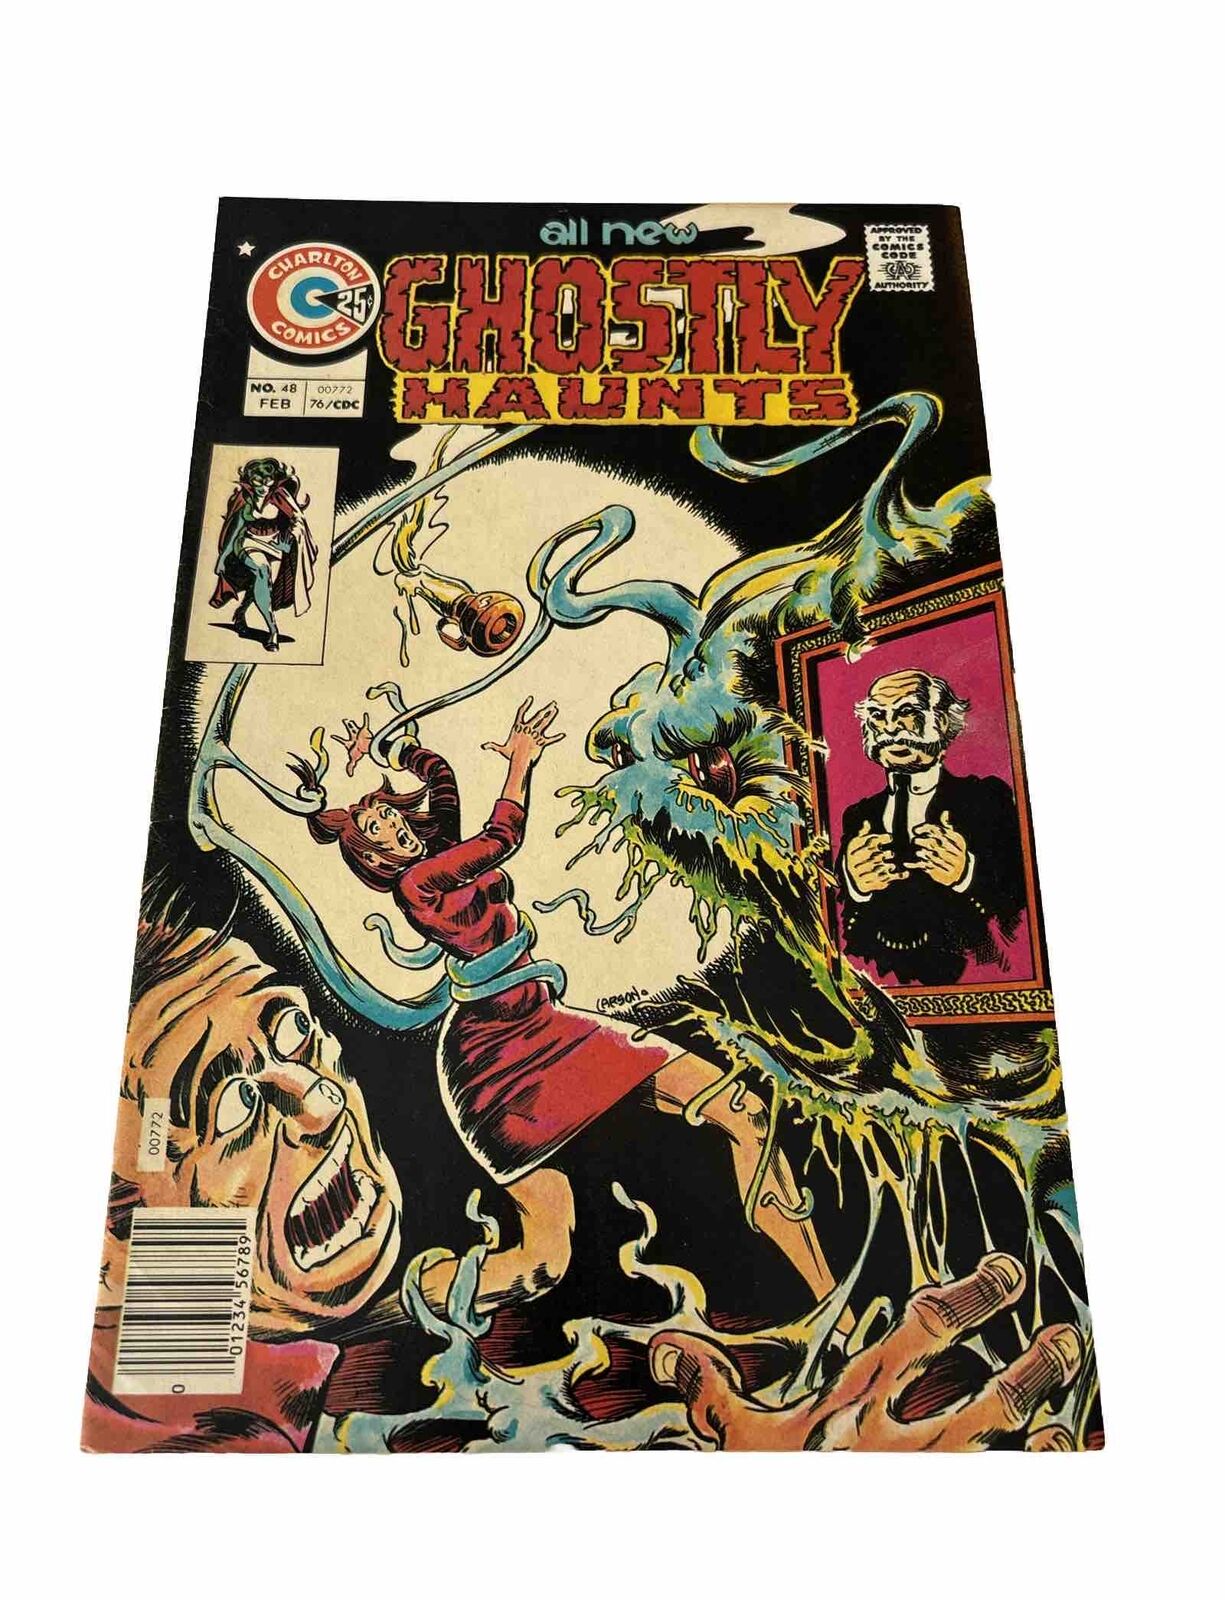 Ghostly Haunts 48, (VF+ 8.5) 1976 Ditko 6 page story VG Condition (box36)